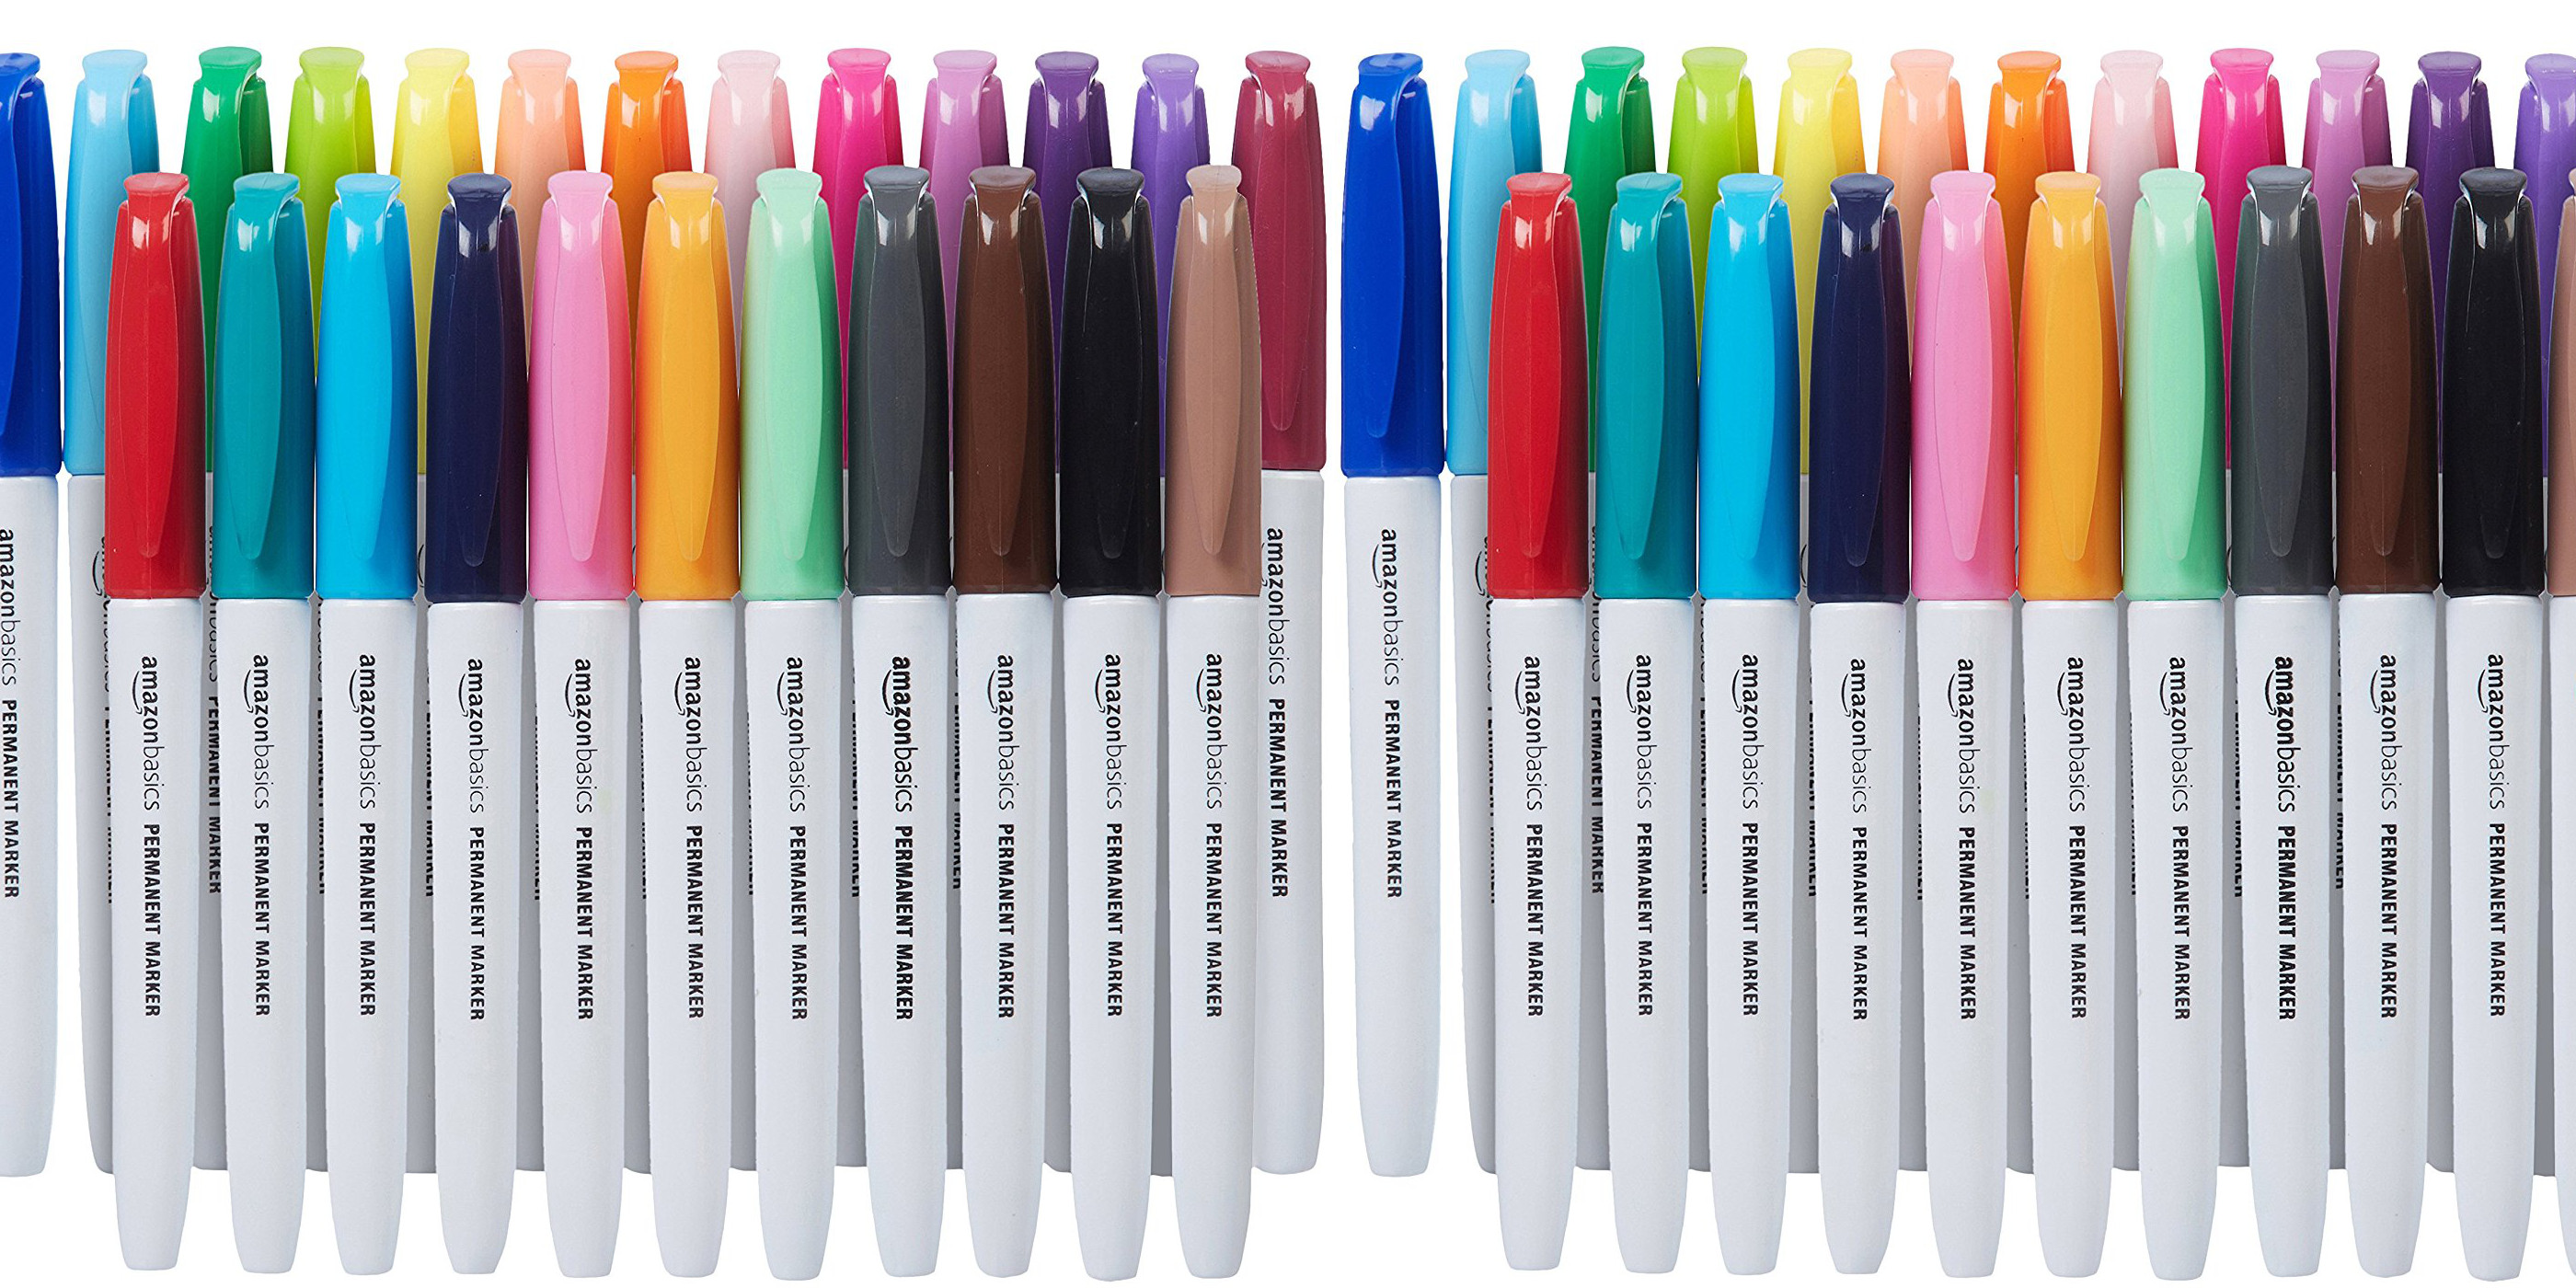 s 24-Pack of Sharpie-style markers are down to $5.50 (Reg. $10)